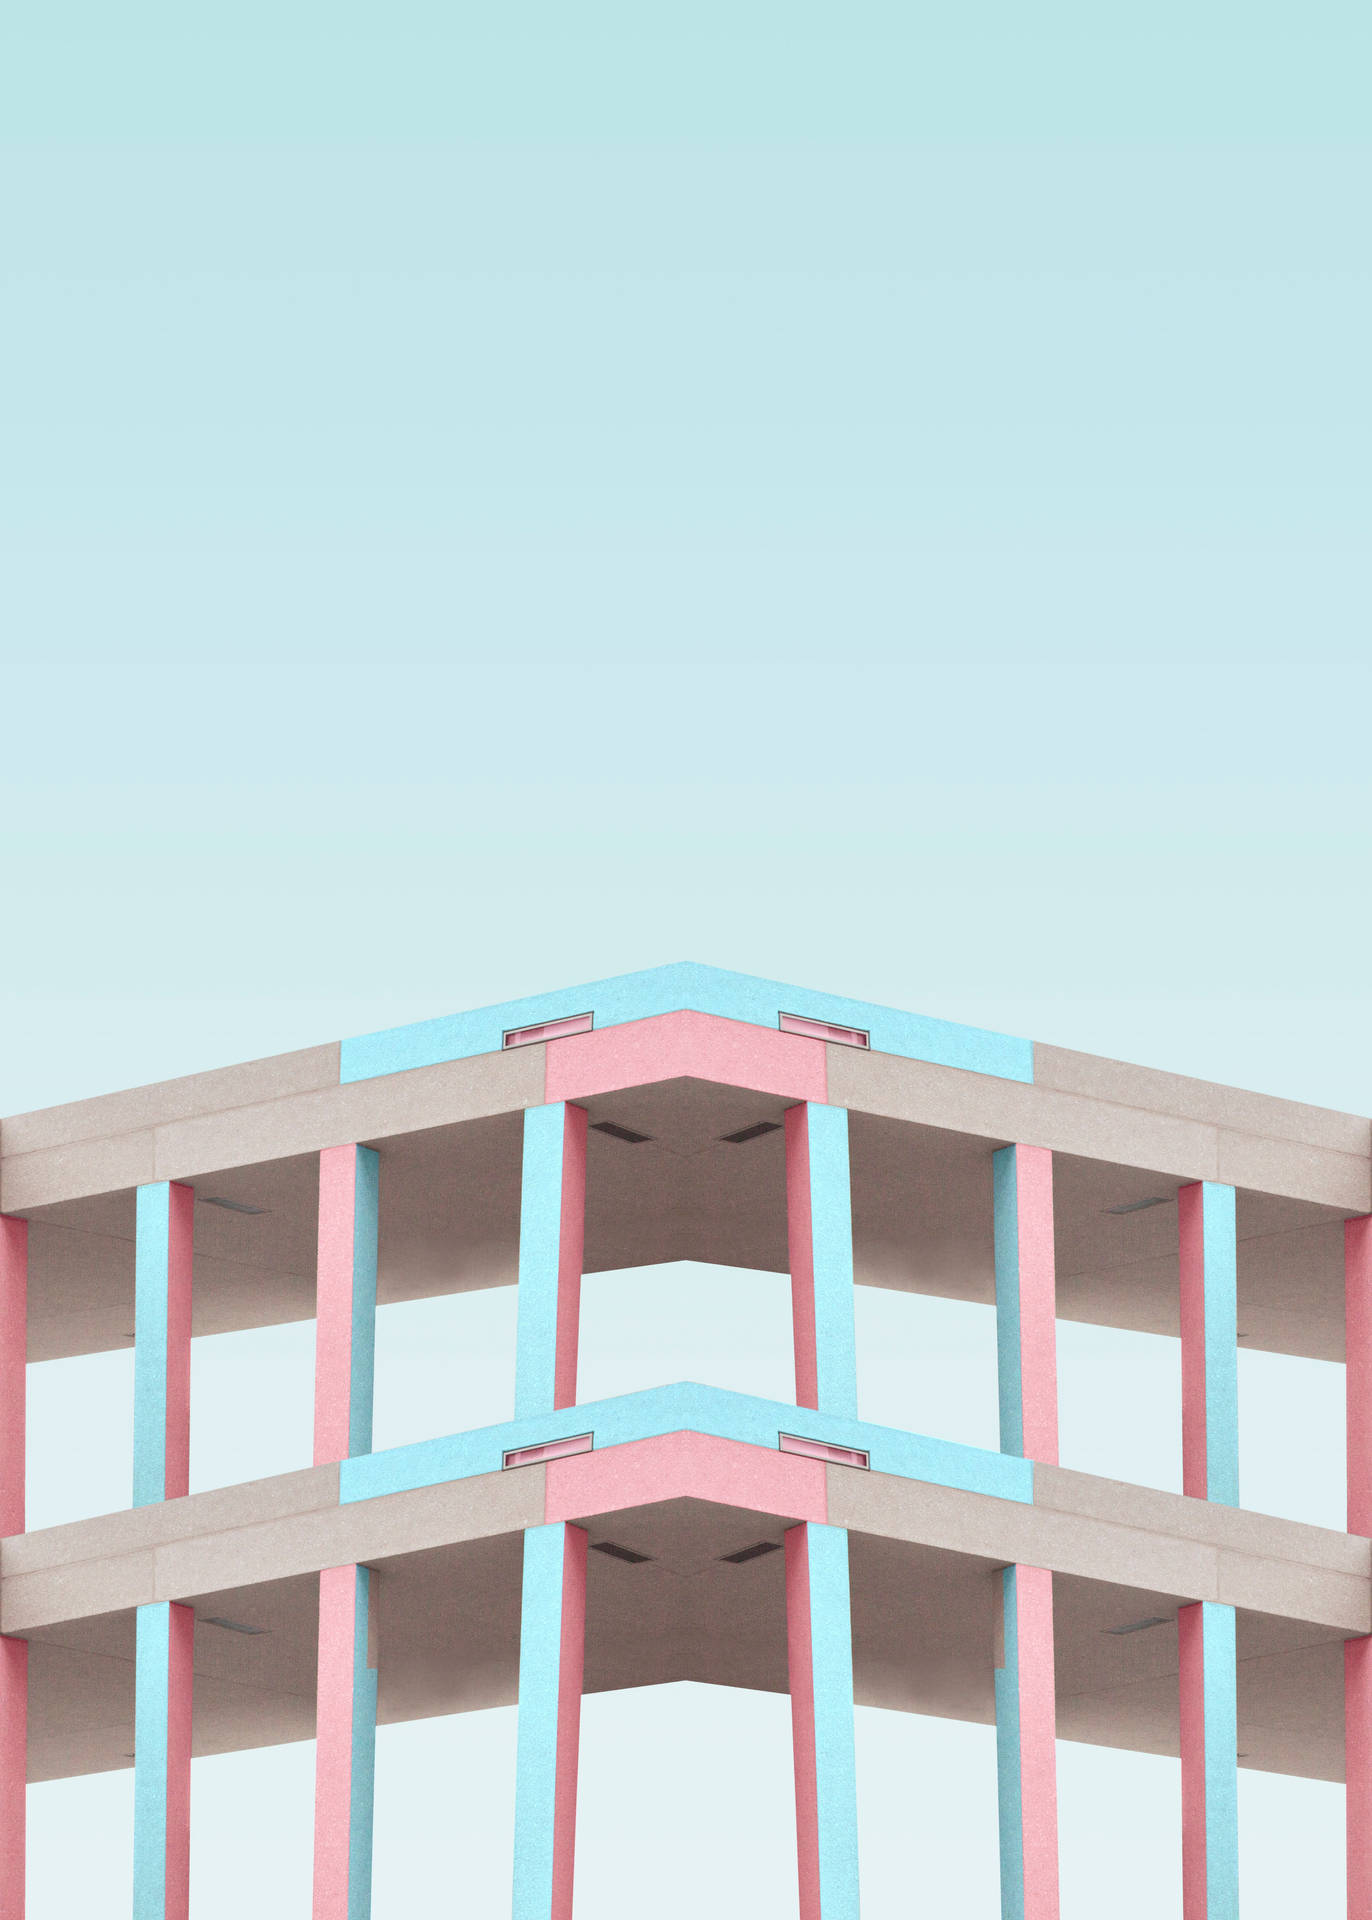 Minimal Blue And Pink Building Architecture Wallpaper